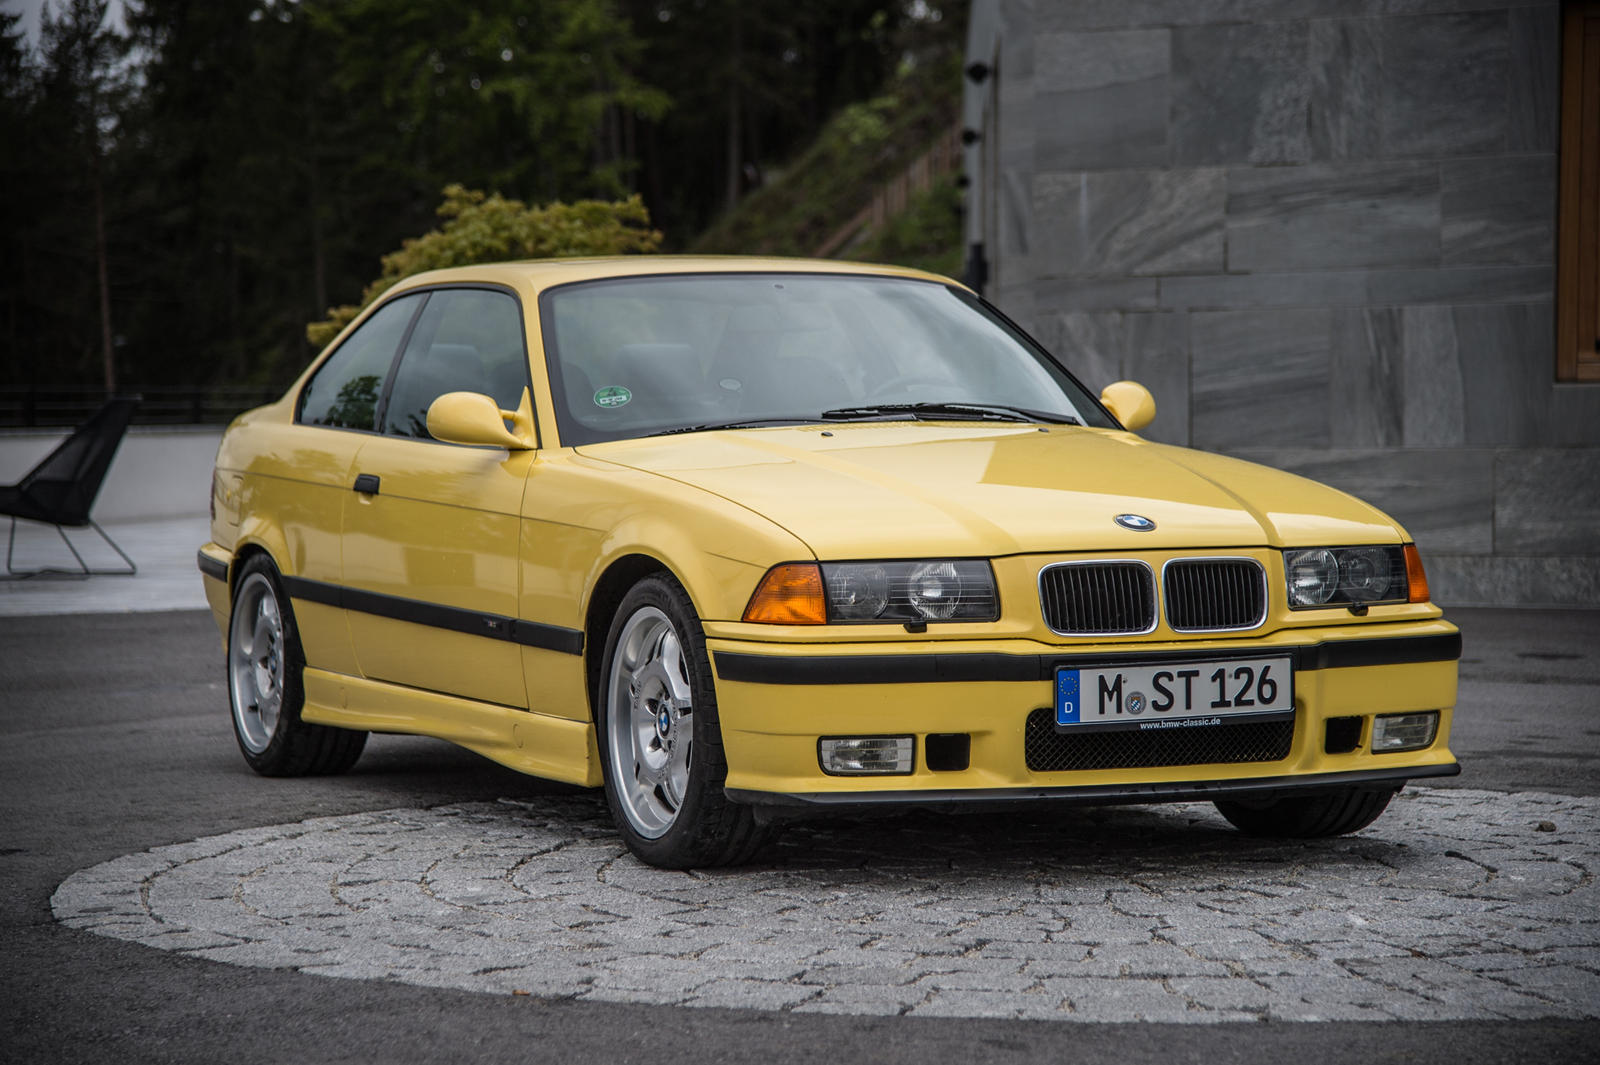 BMW M3 E36 2nd Generation - What To Check Before You Buy